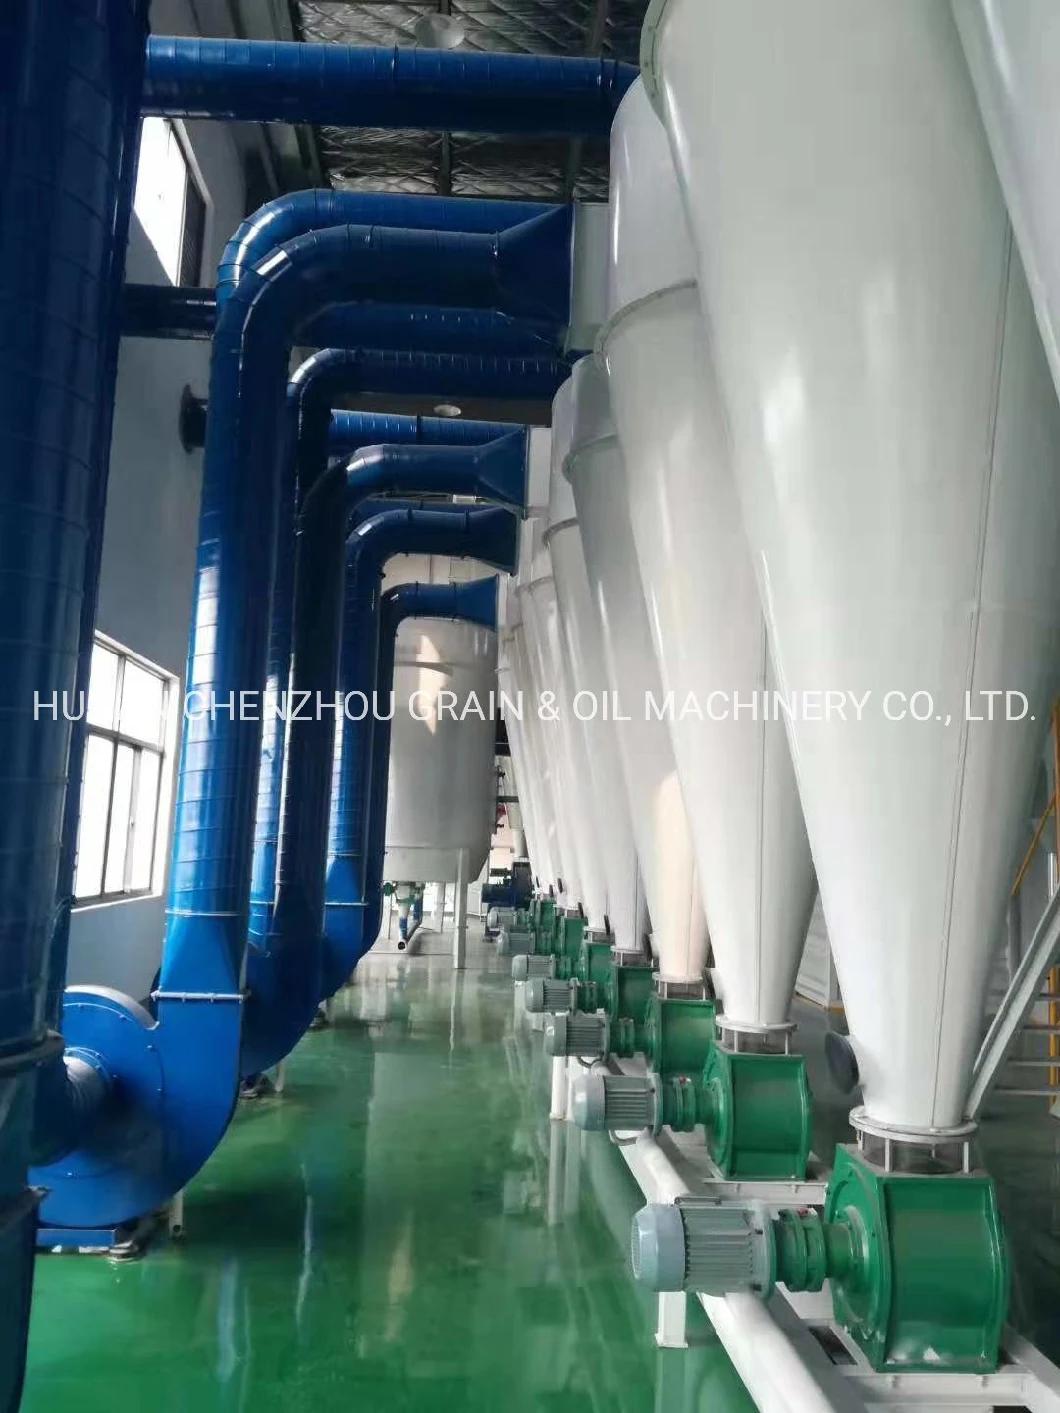 200 Ton Per Day Parboil Rice Mill Plant Automatic Rice Mill Machine for Rice Plant